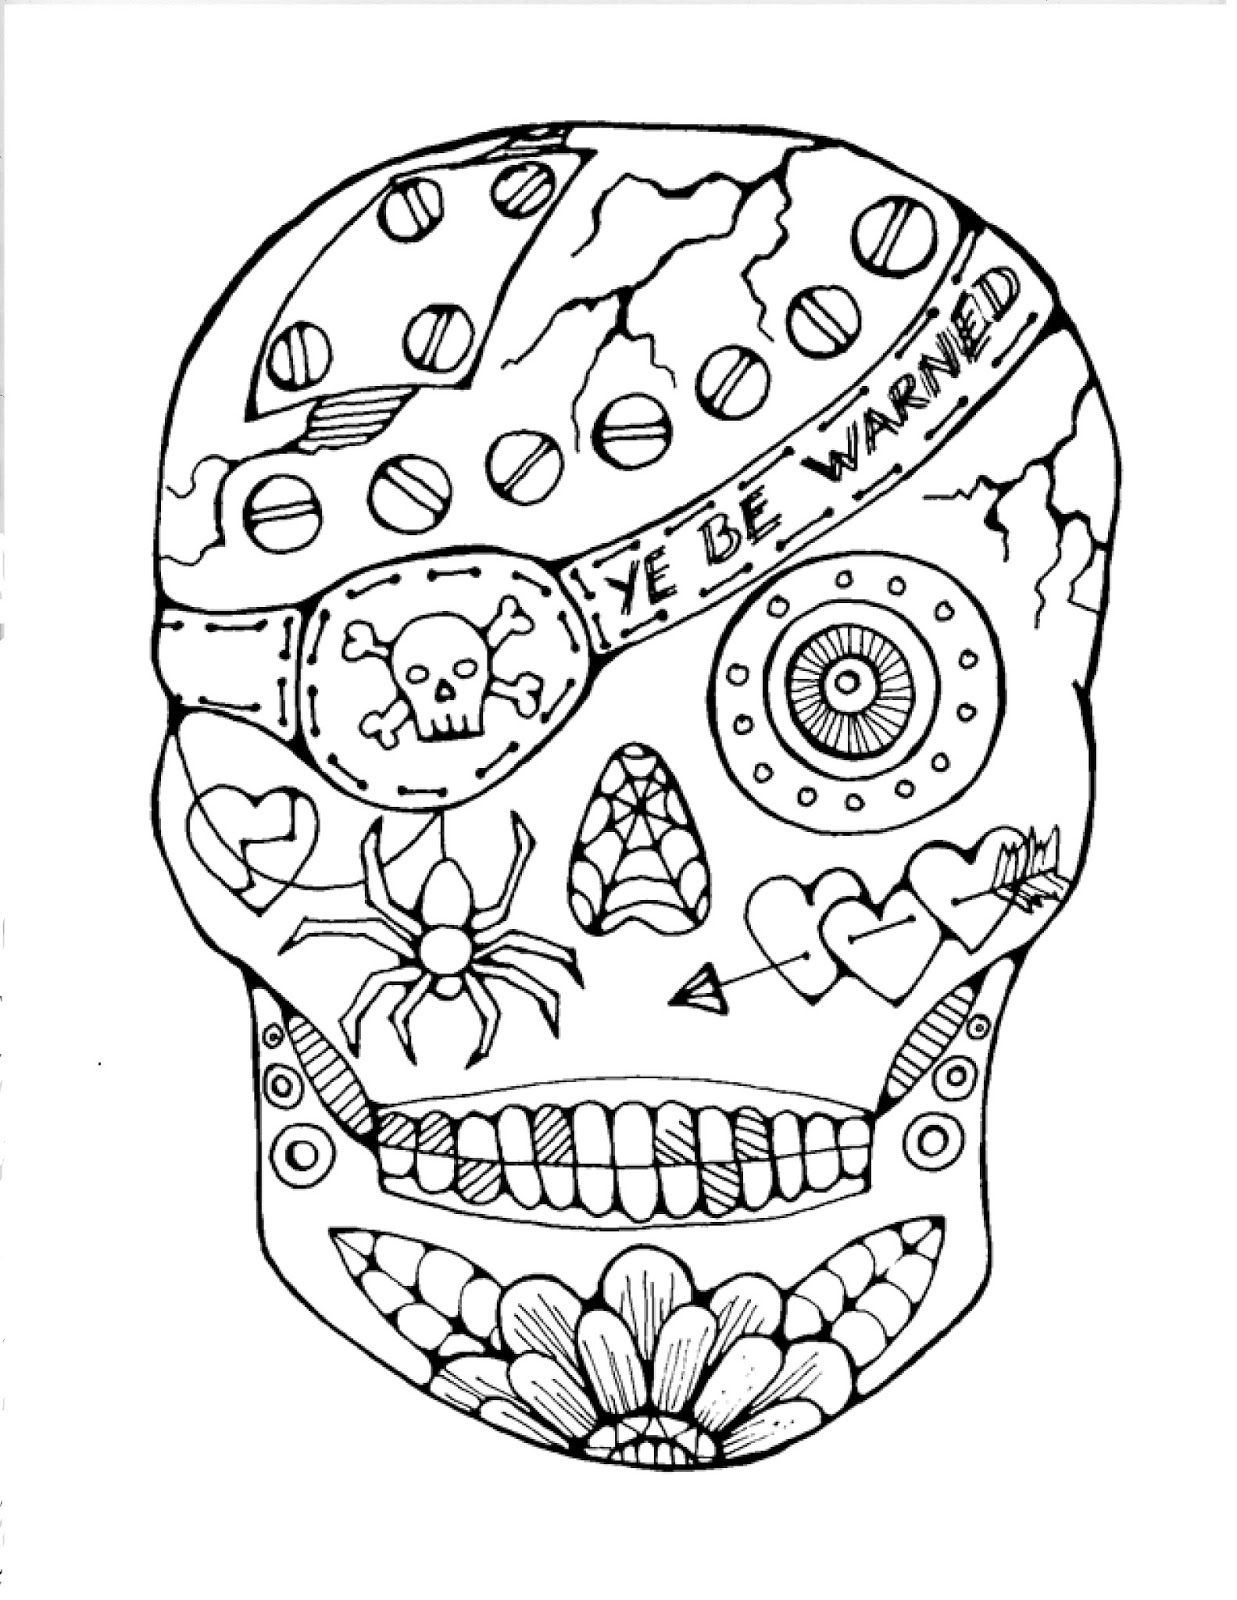 sugar-skull-coloring-pages-best-coloring-pages-for-kids